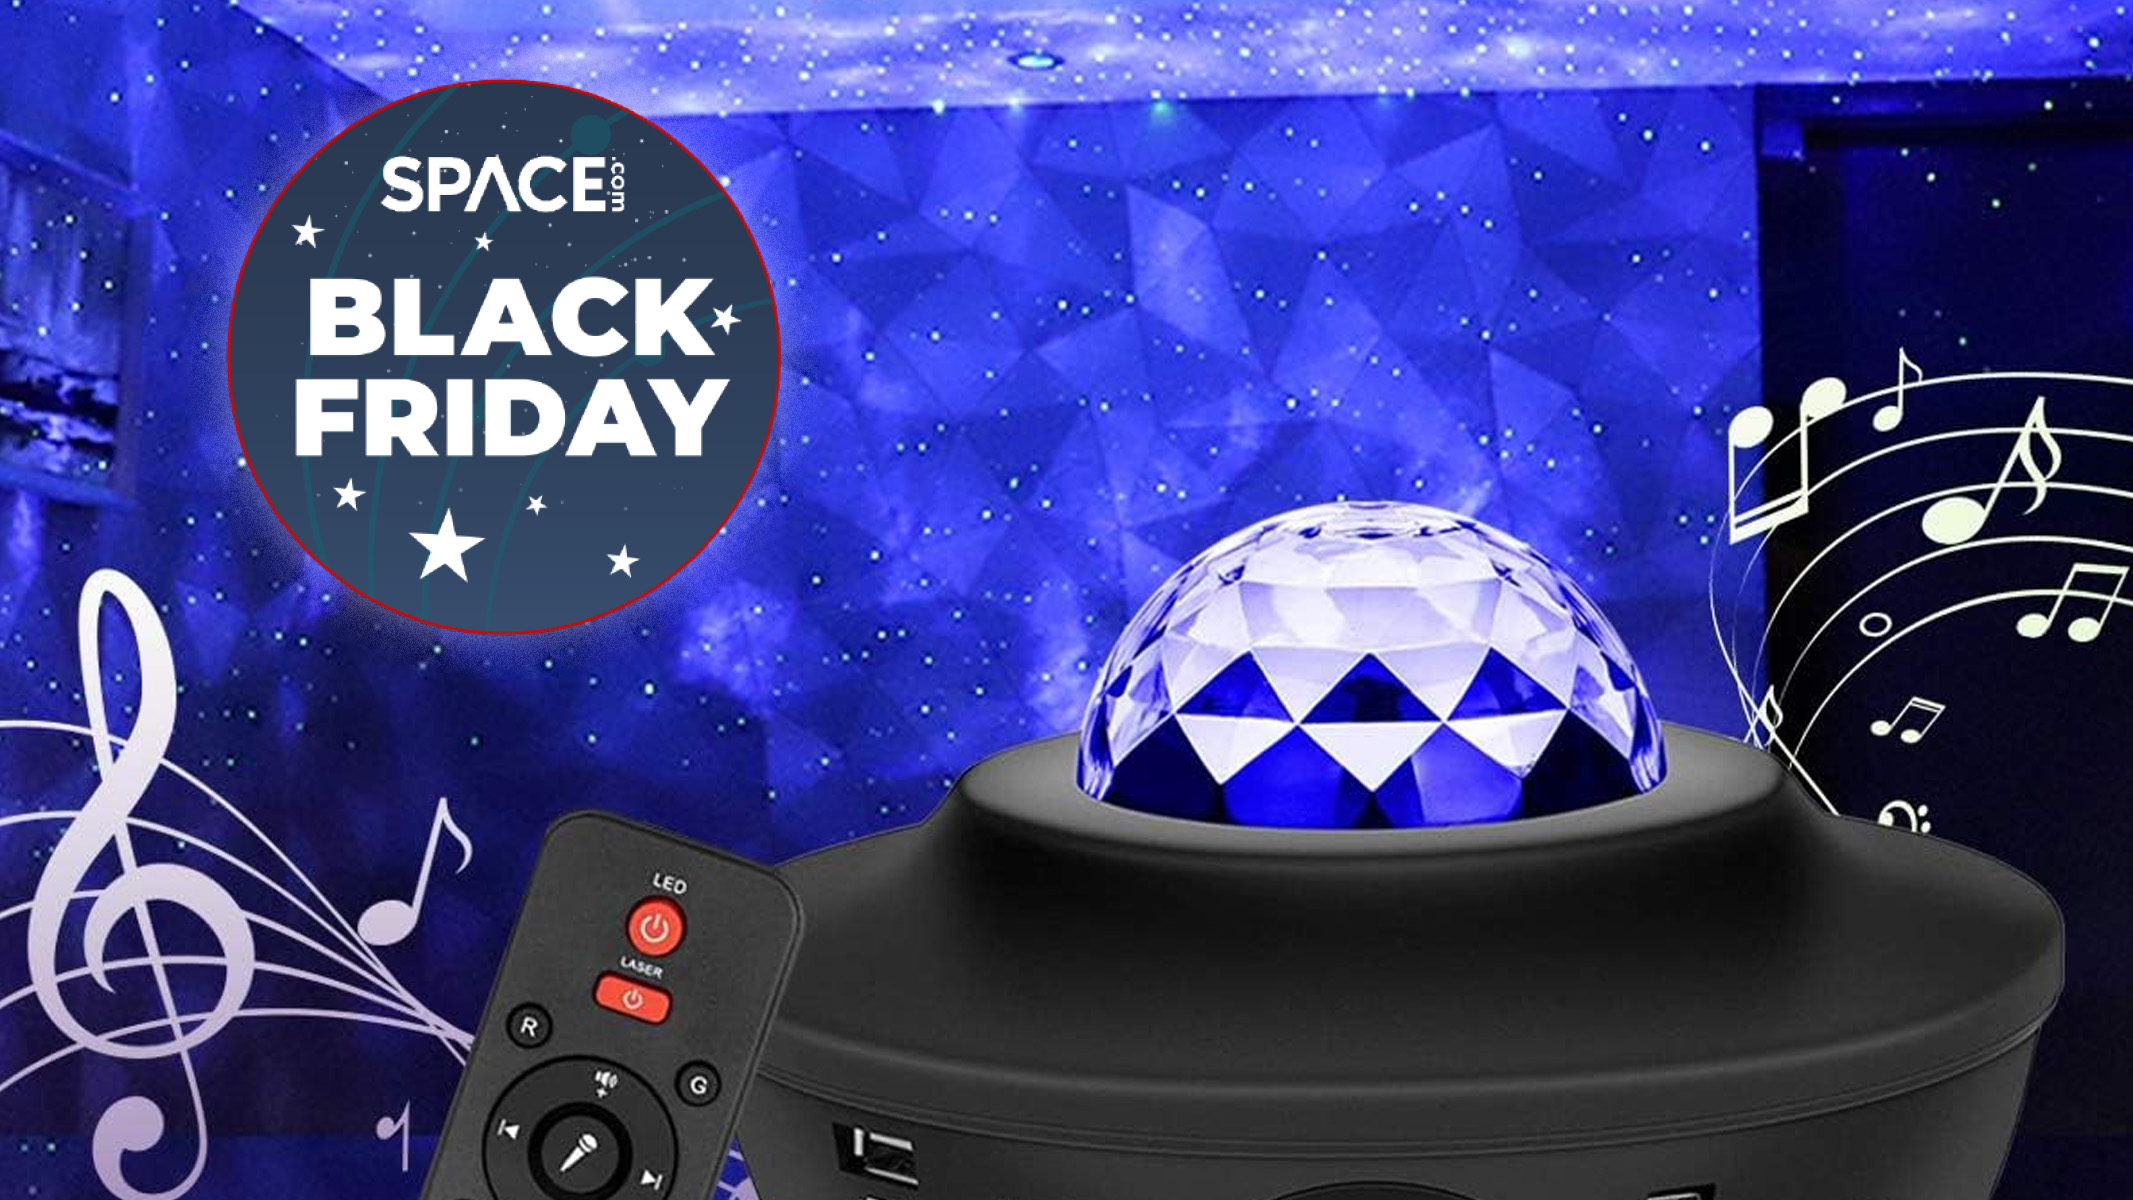 Grab a mesmerizing star projector for less than $20 this Black Friday Space